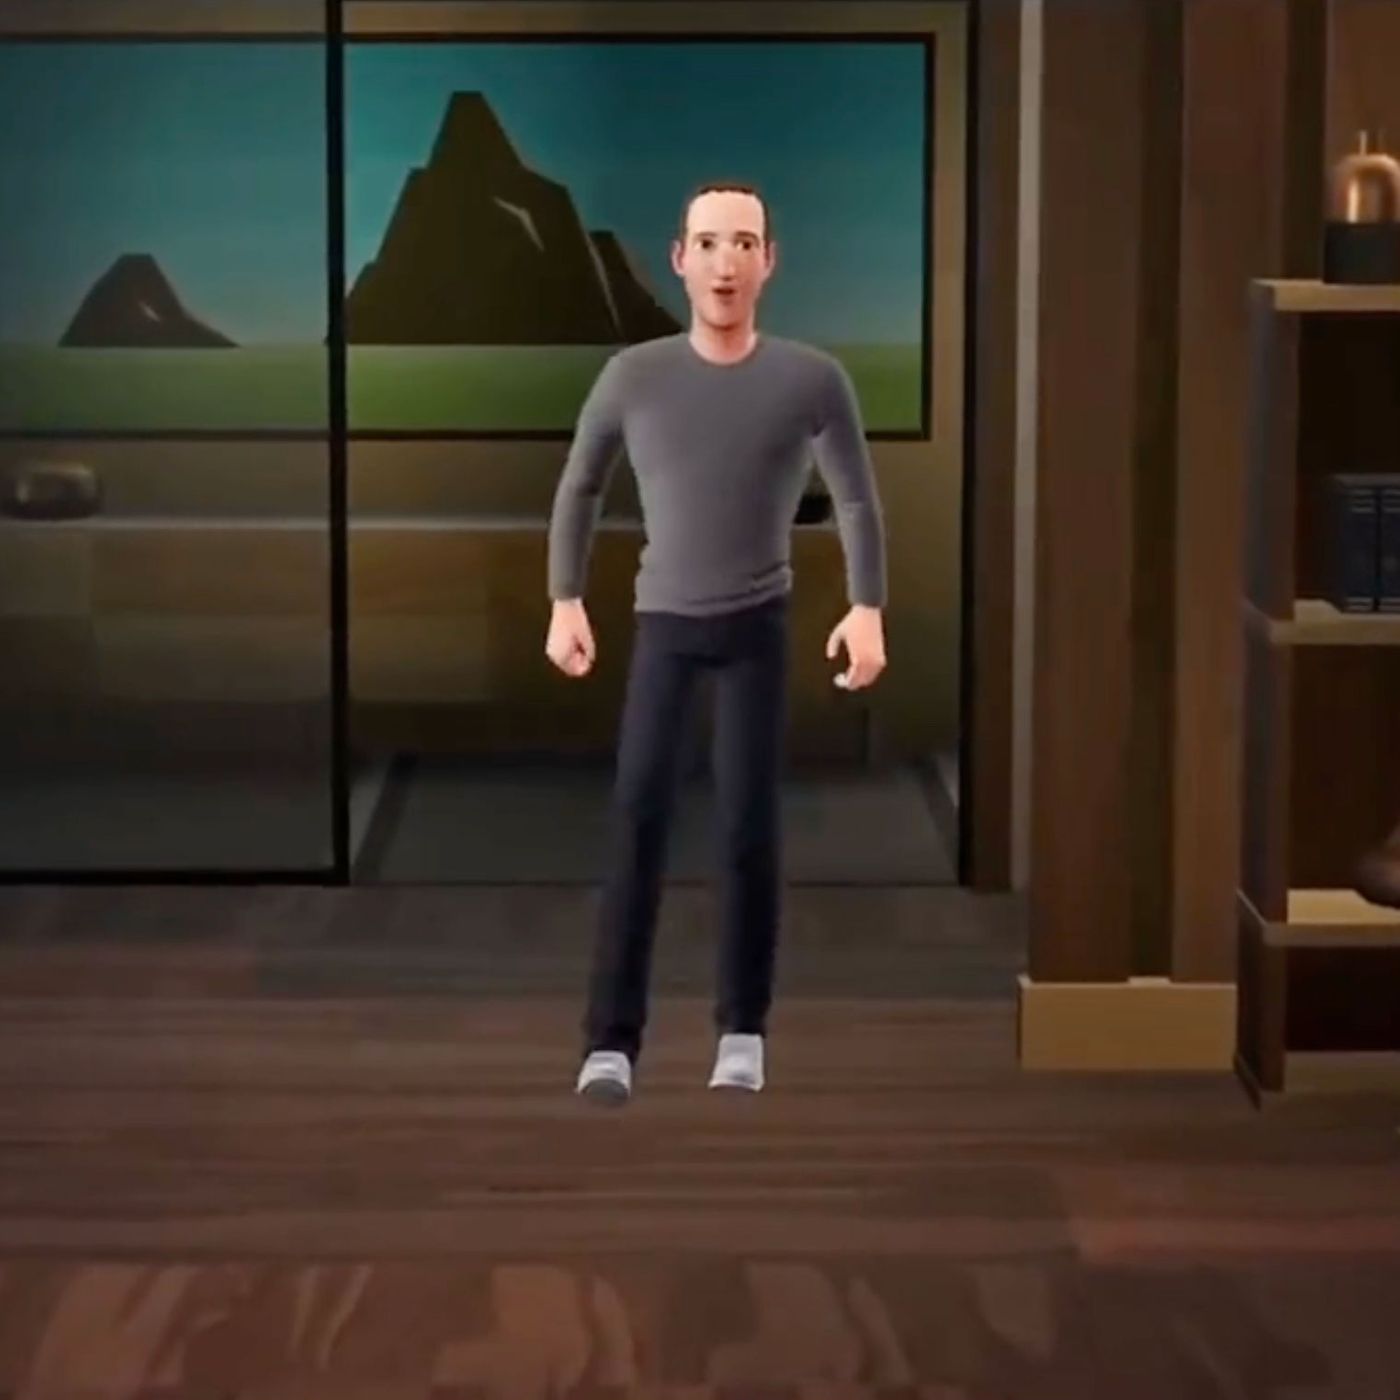 What Is The Metaverse—And Why Does Mark Zuckerberg Care So Much About It?